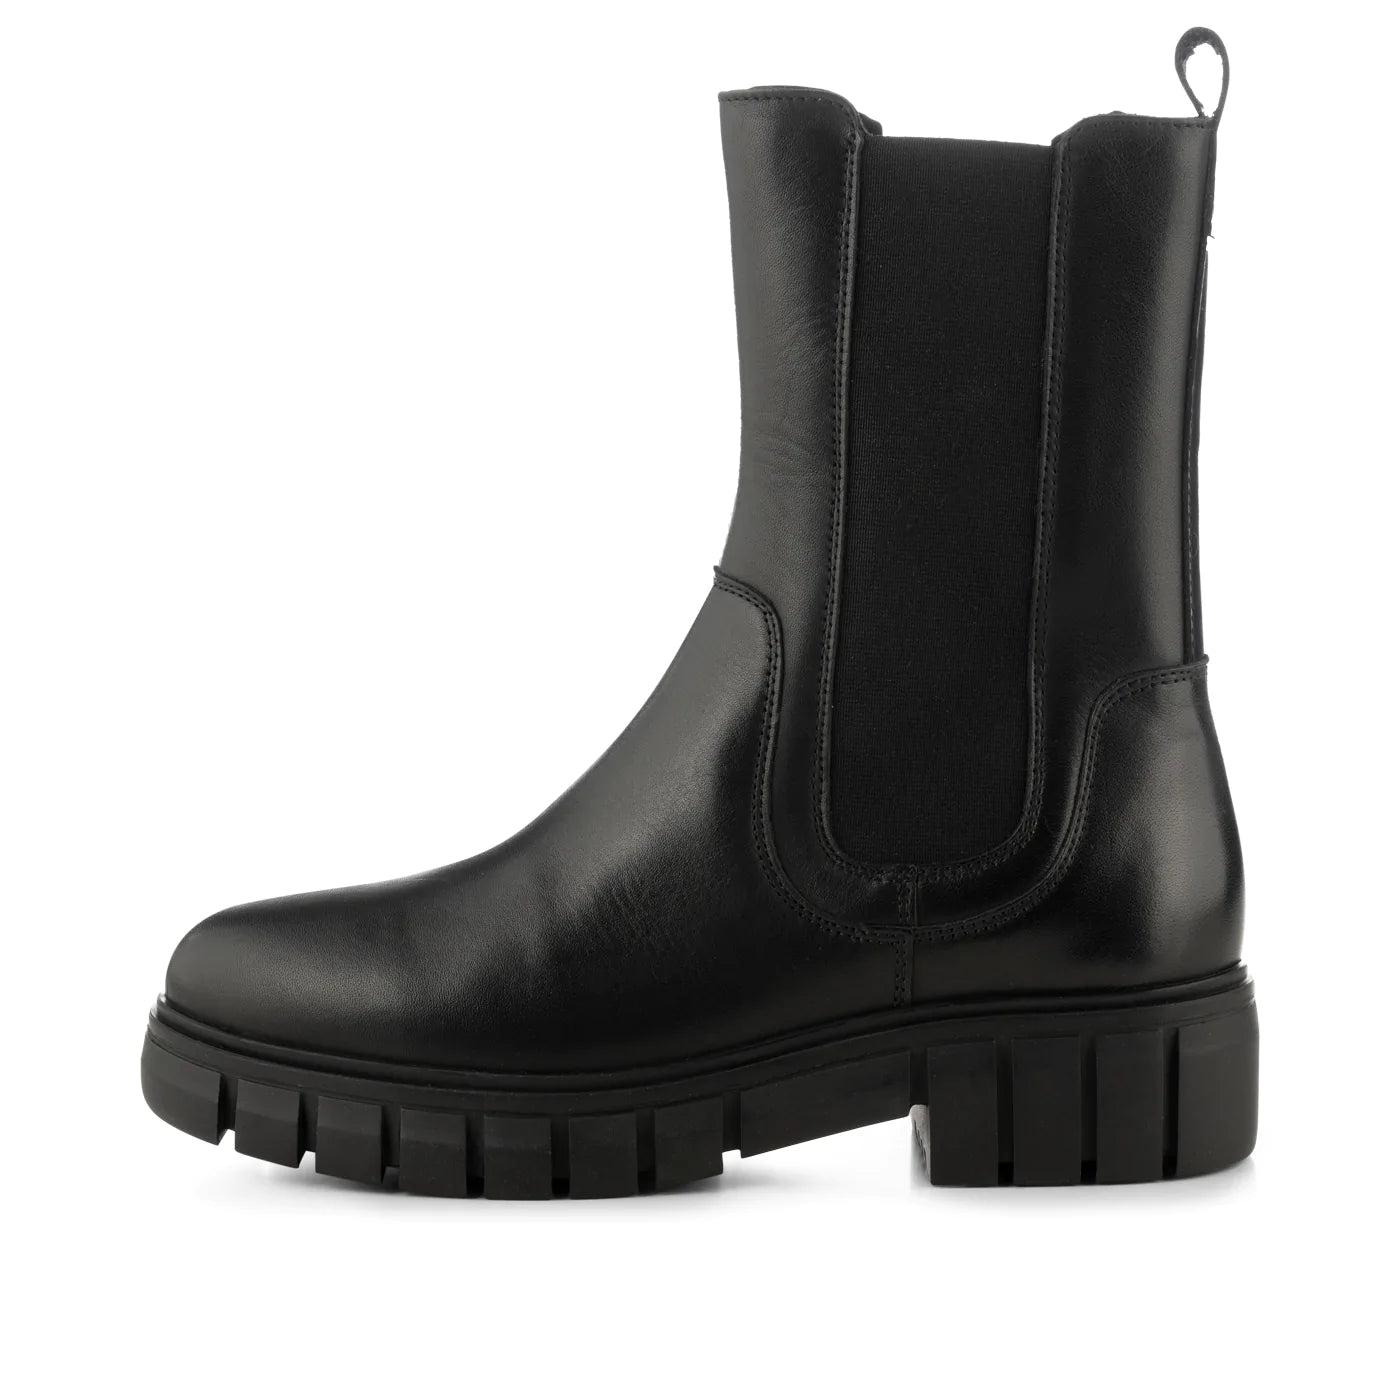 Rebel Chelsea High Boot-Black Atterley Women Shoes Boots Chelsea Boots 